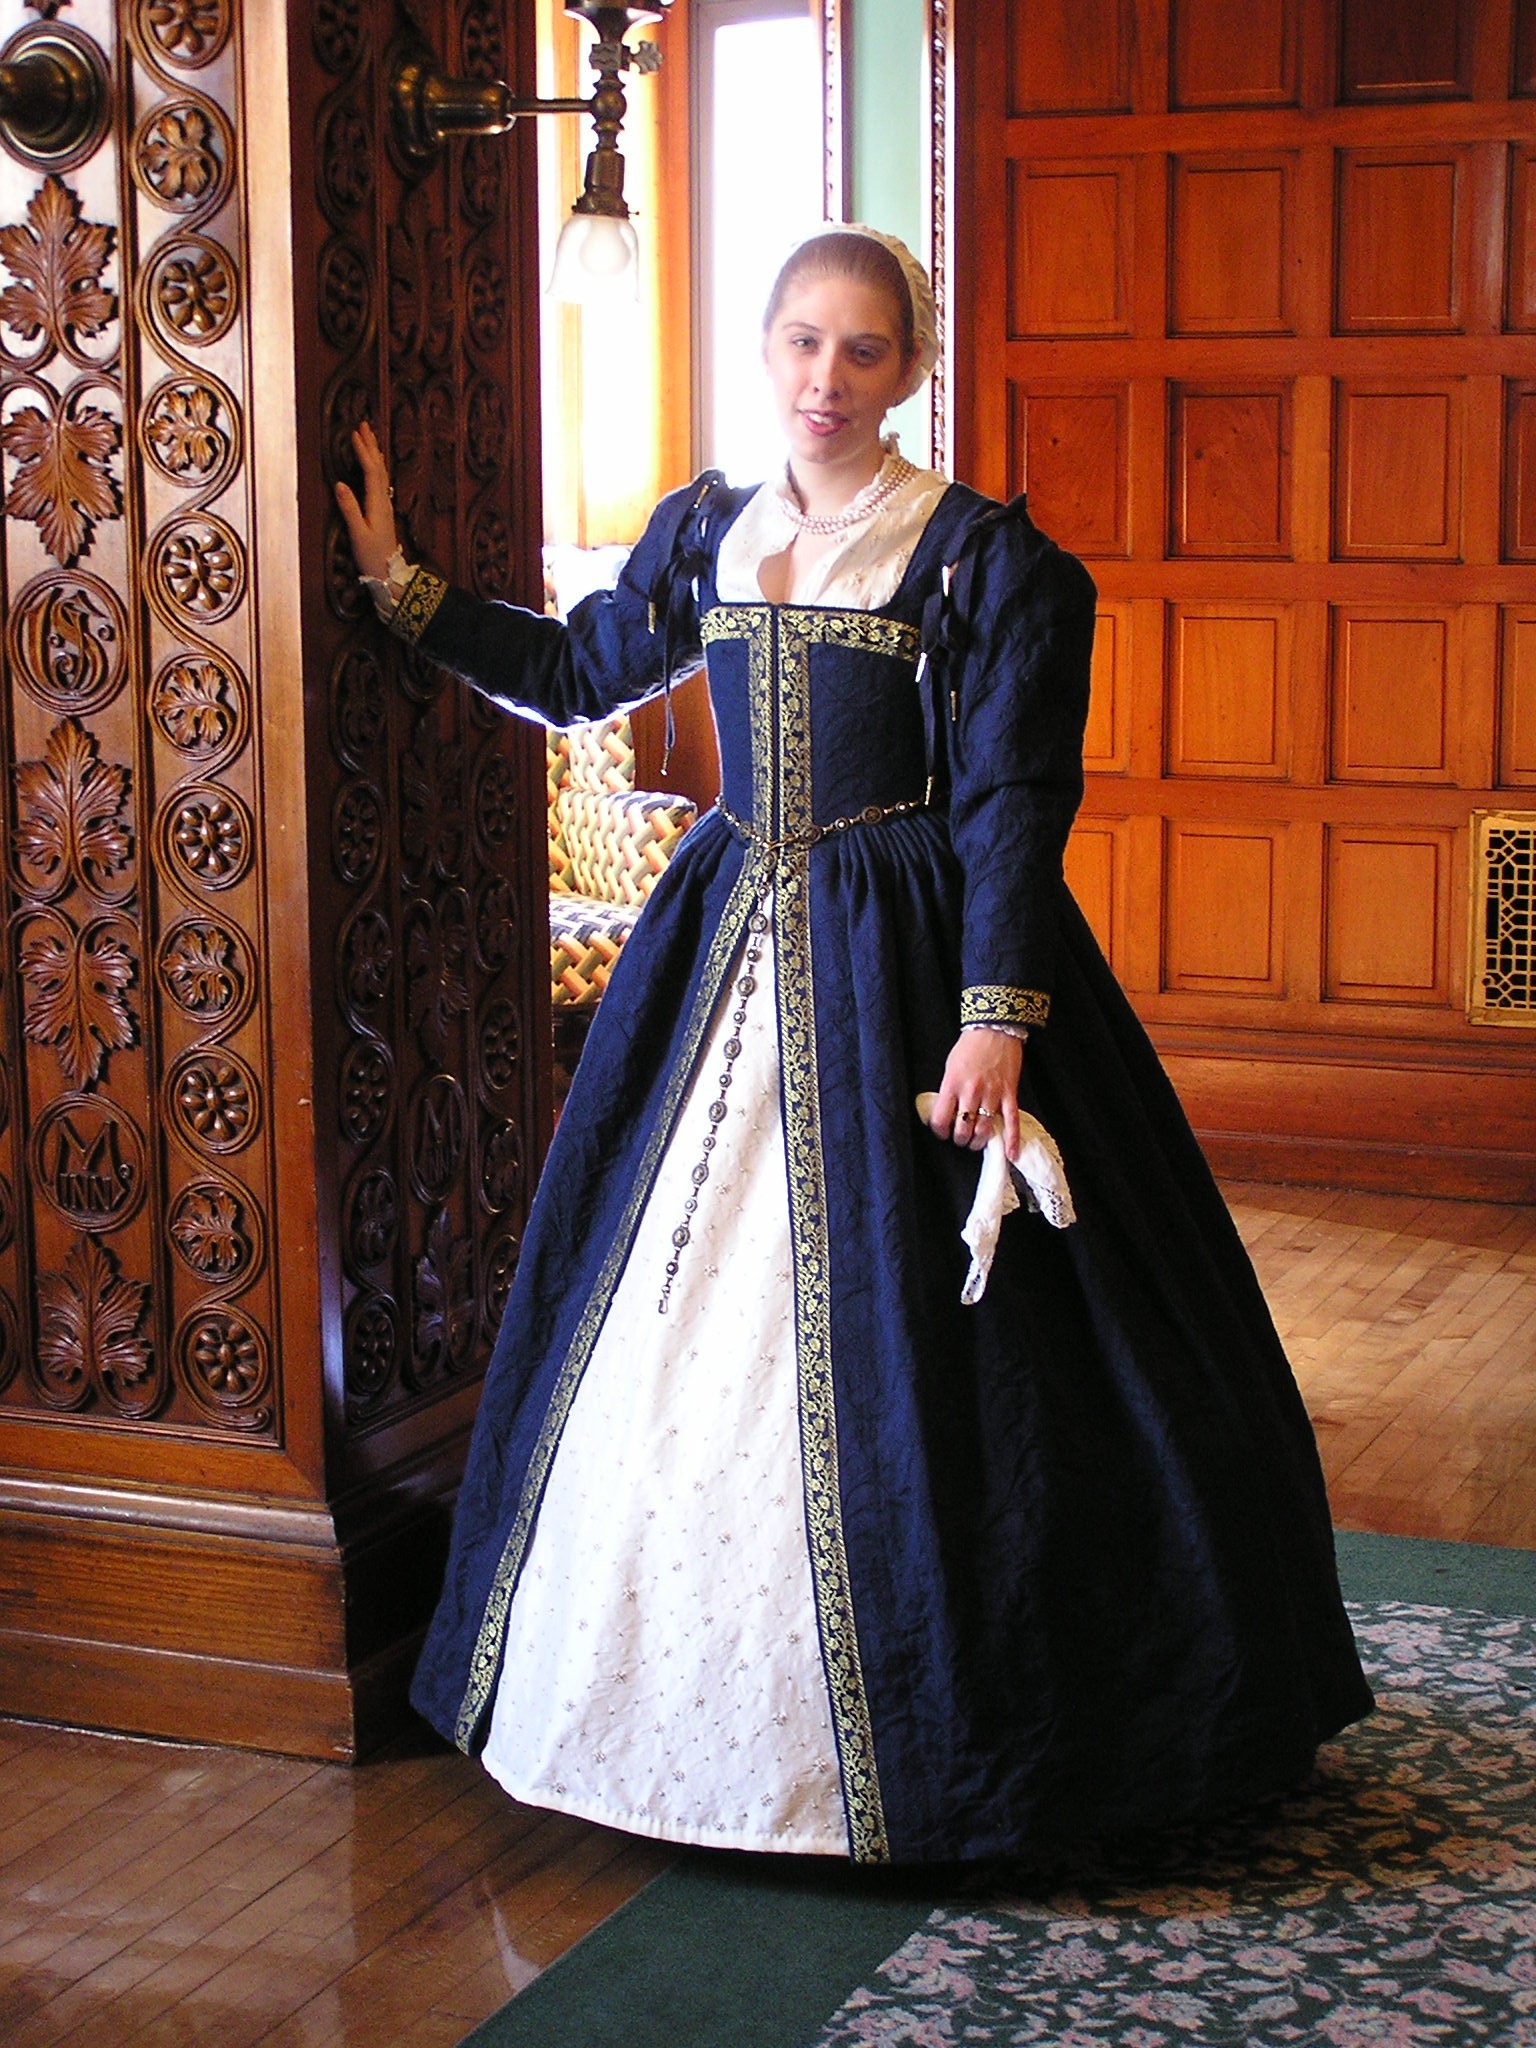 Elizabethan style kirtle. It is worn with a hoop skirt, tie on sleeves, a forepanel skirt, petticoats, a partlet and a coif. She is likely wearing a corset and chemise underneath.